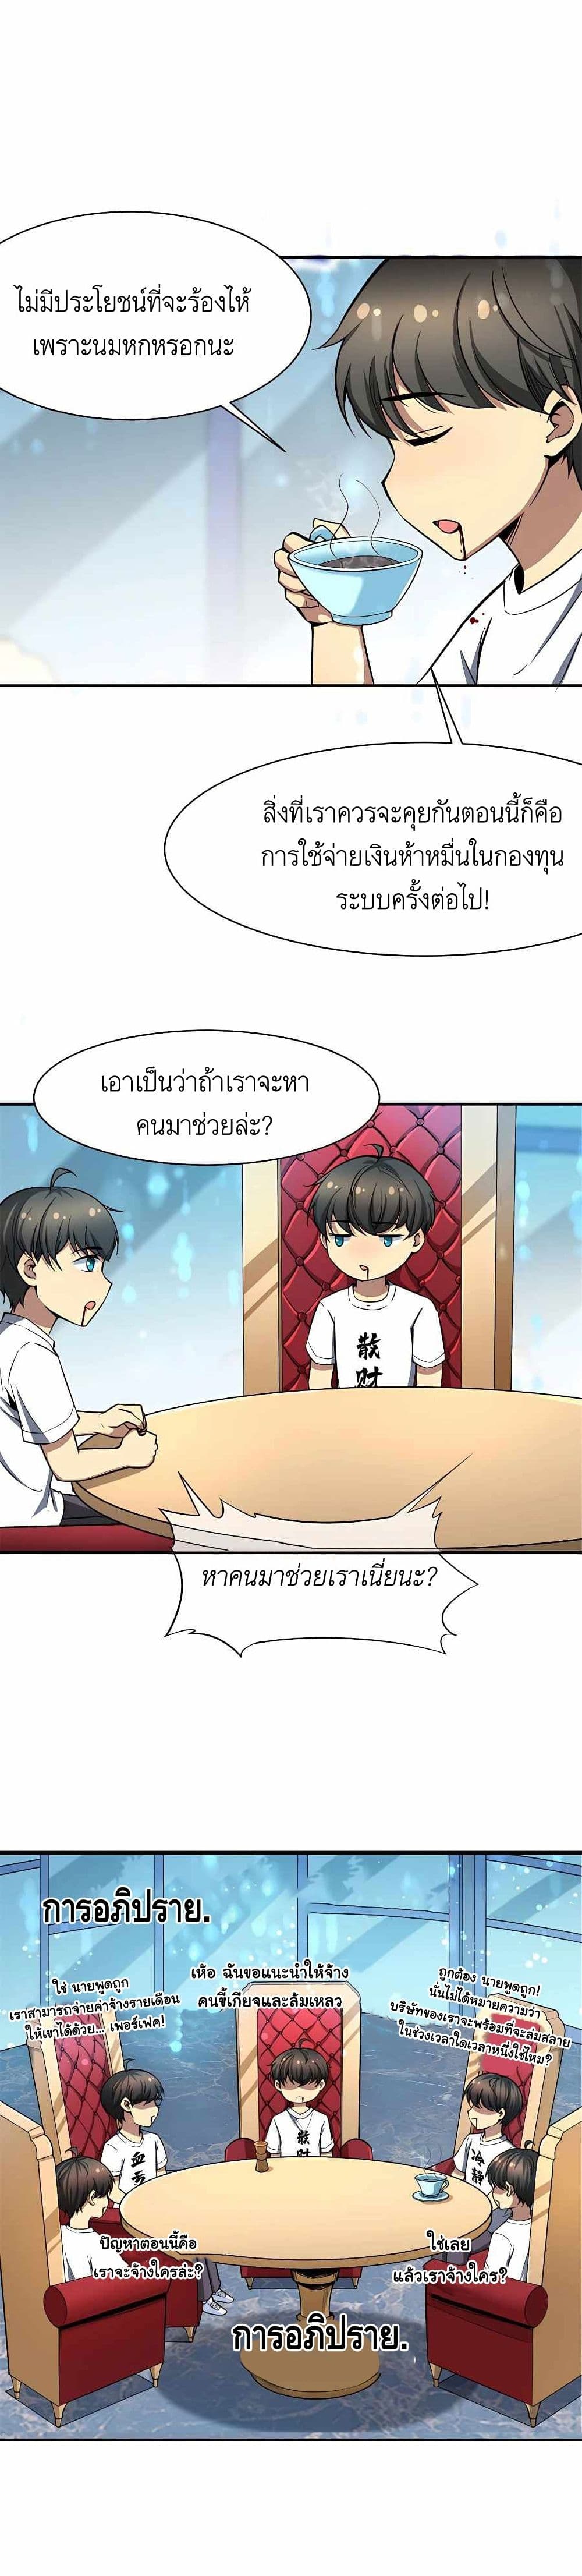 Losing Money To Be A Tycoon ตอนที่ 310